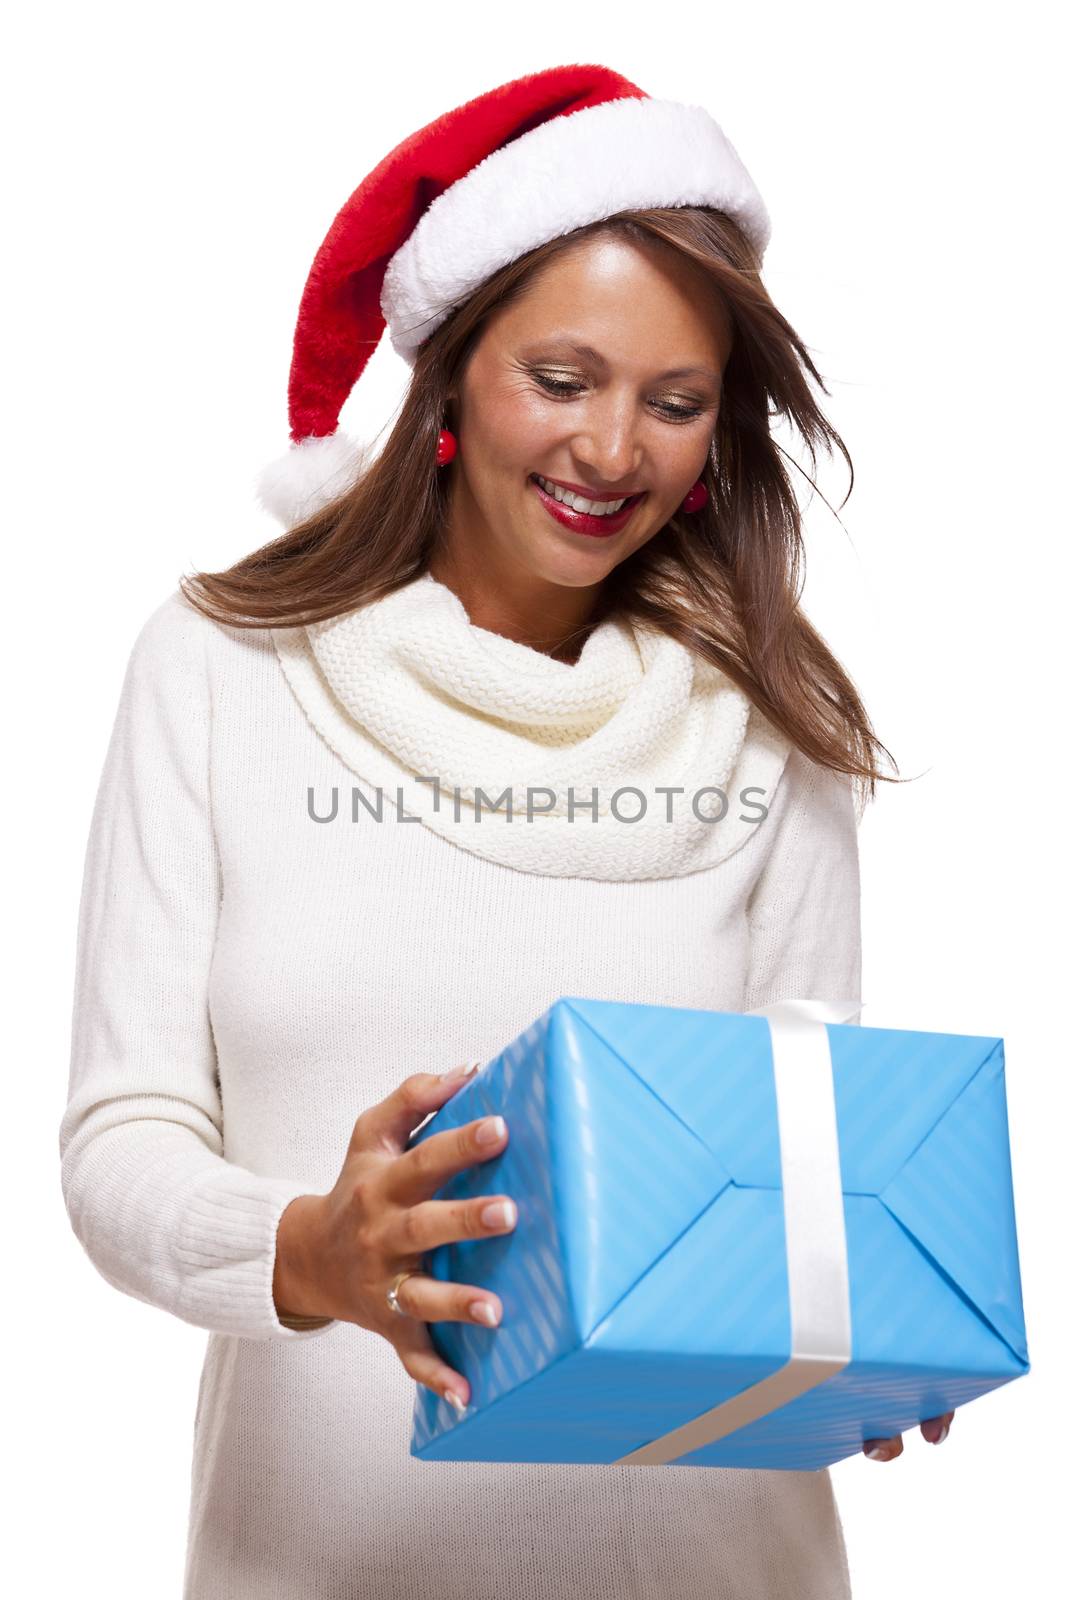 Beautiful vivacious woman wearing a red Santa hat laughing and holding up a gift-wrapped blue Christmas gift as she celebrates the festive season, on white